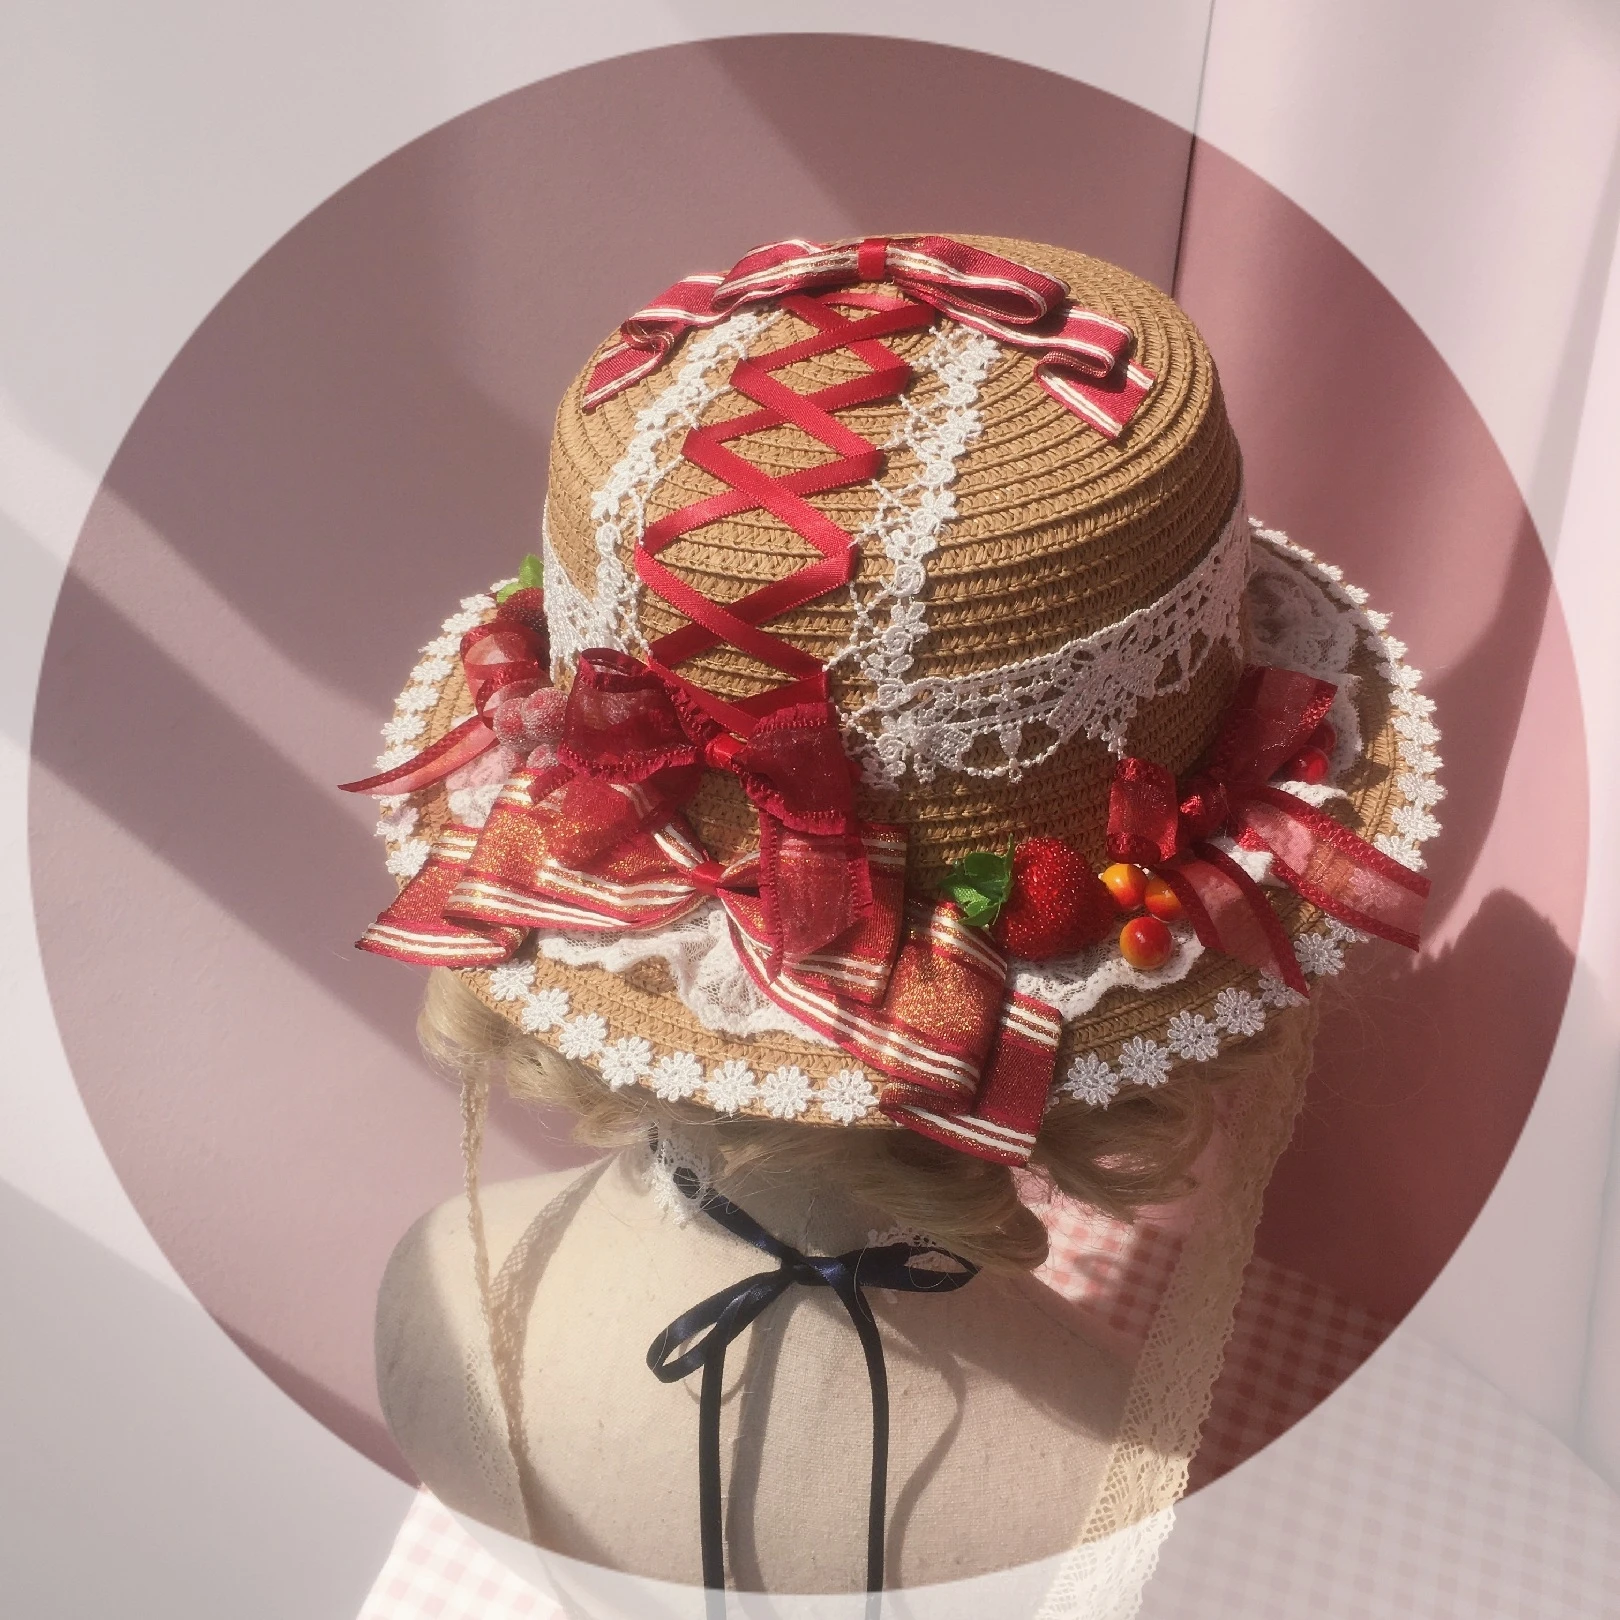 

Lolita Sweet Strawberry Jam Straw Hat Soft Sister Kawaii Lace Trim Flat Top Cap Cute Red Bowknot Pastoral Style Sun hat Cosplay